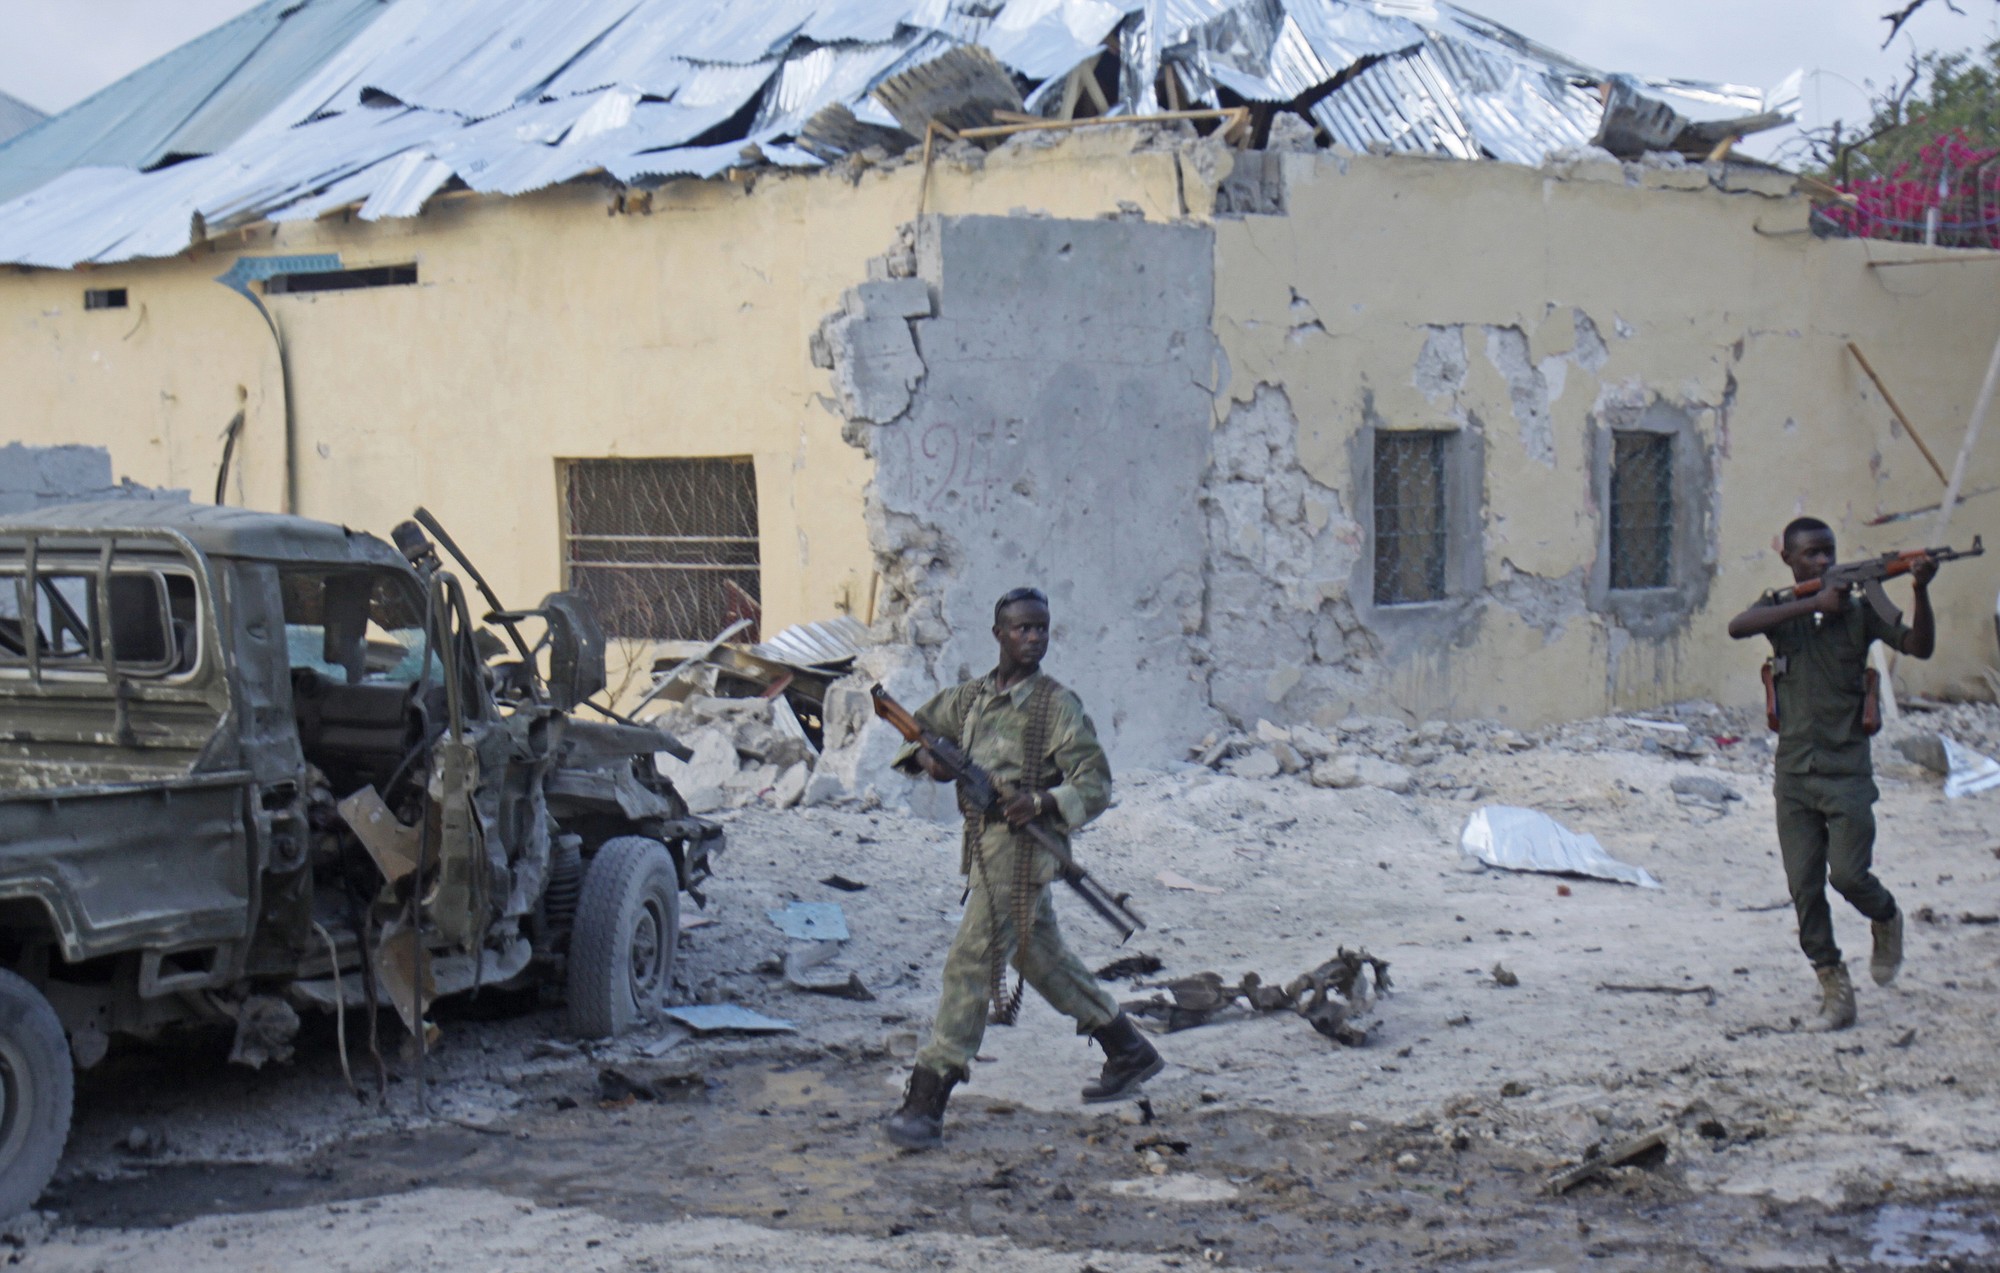 Somali soldiers take up positions after a bomb went off Friday at the gate of a popular hotel in Mogadishu, Somalia.